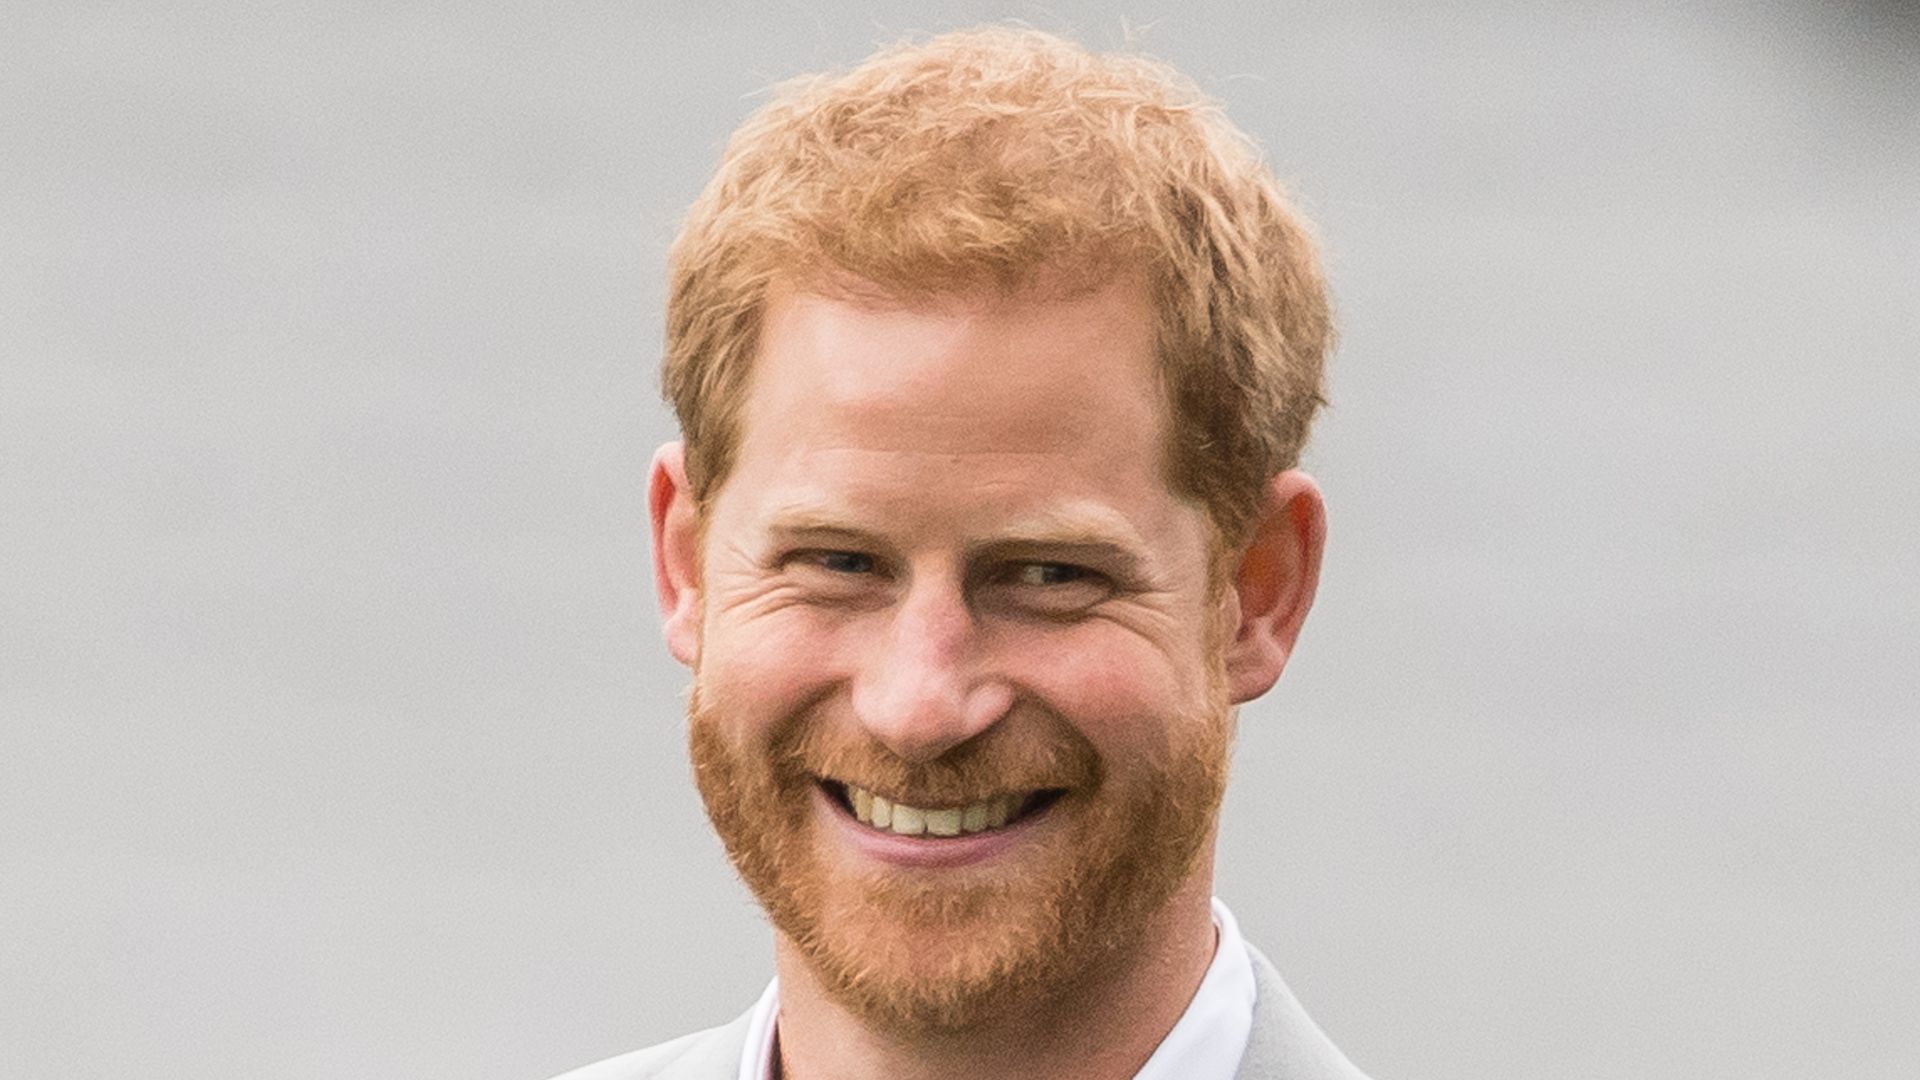 Prince Harry smiling in grey suit 